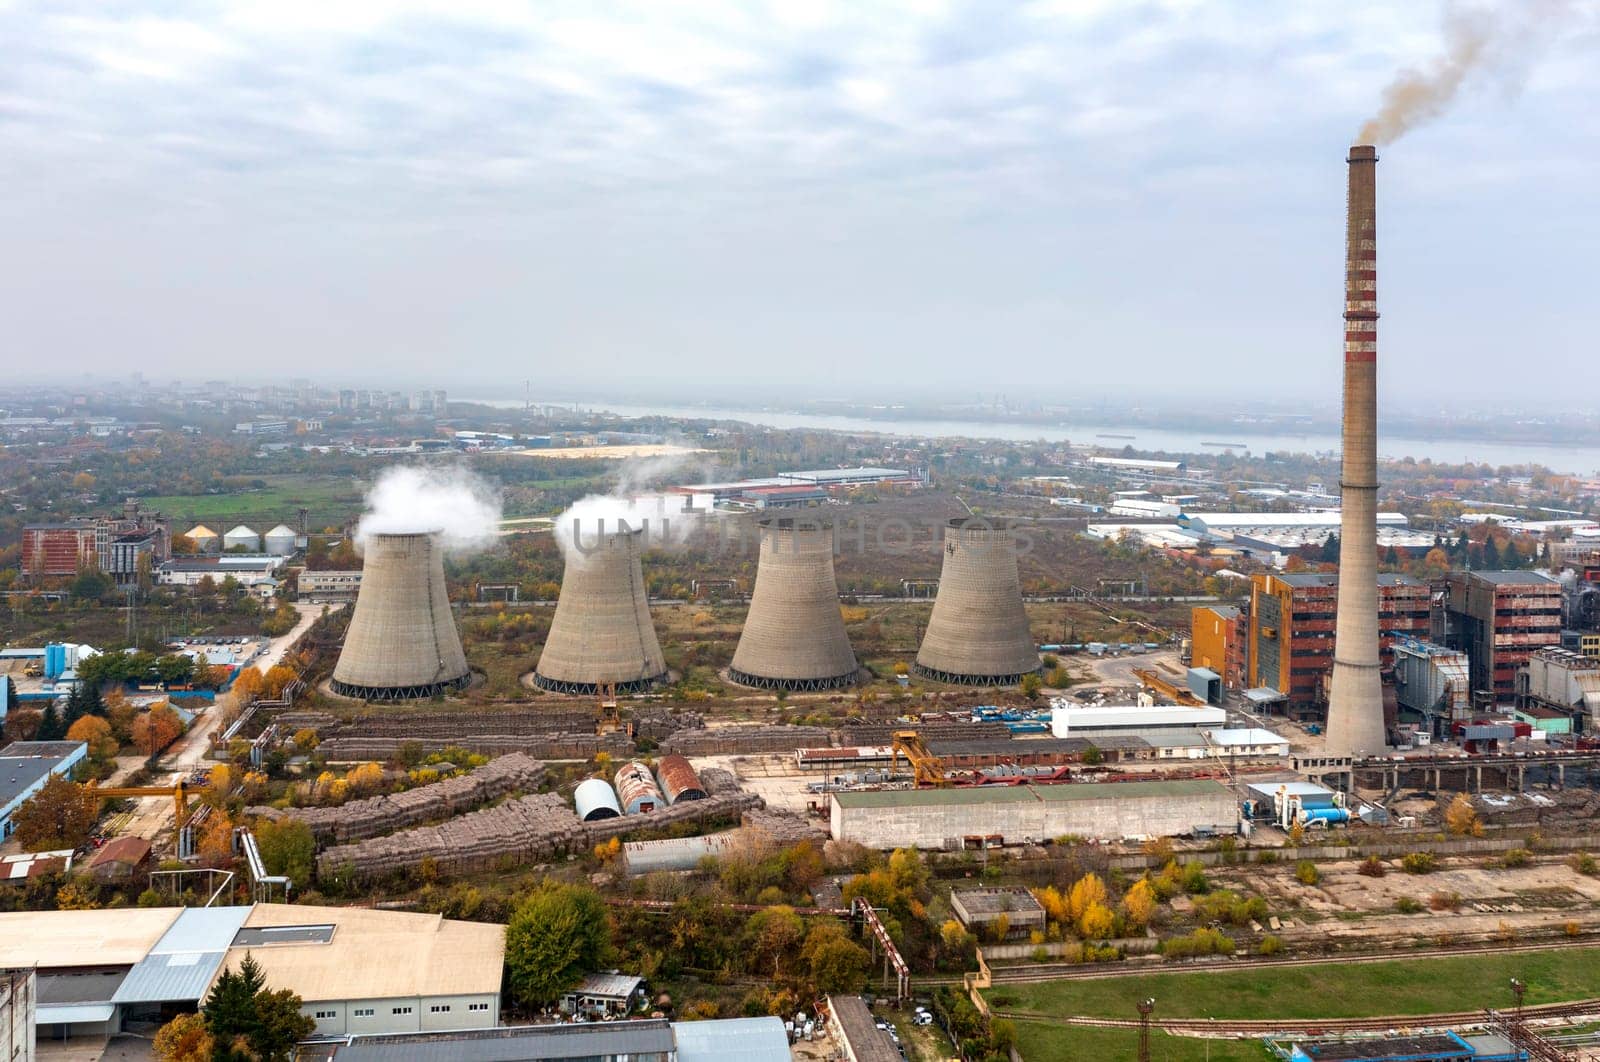 Aerial View Of Large Chimneys From The Coal Power Plant  by EdVal